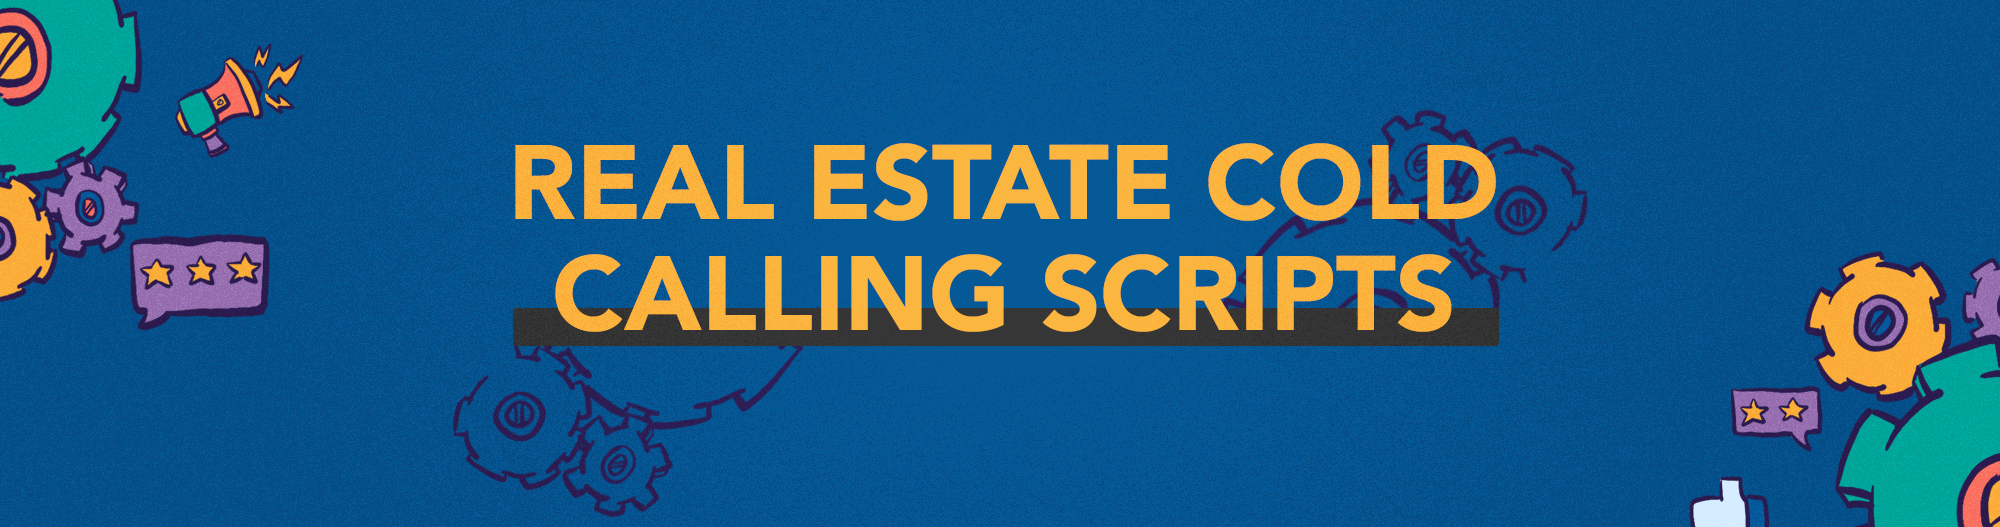 real estate cold calling tips